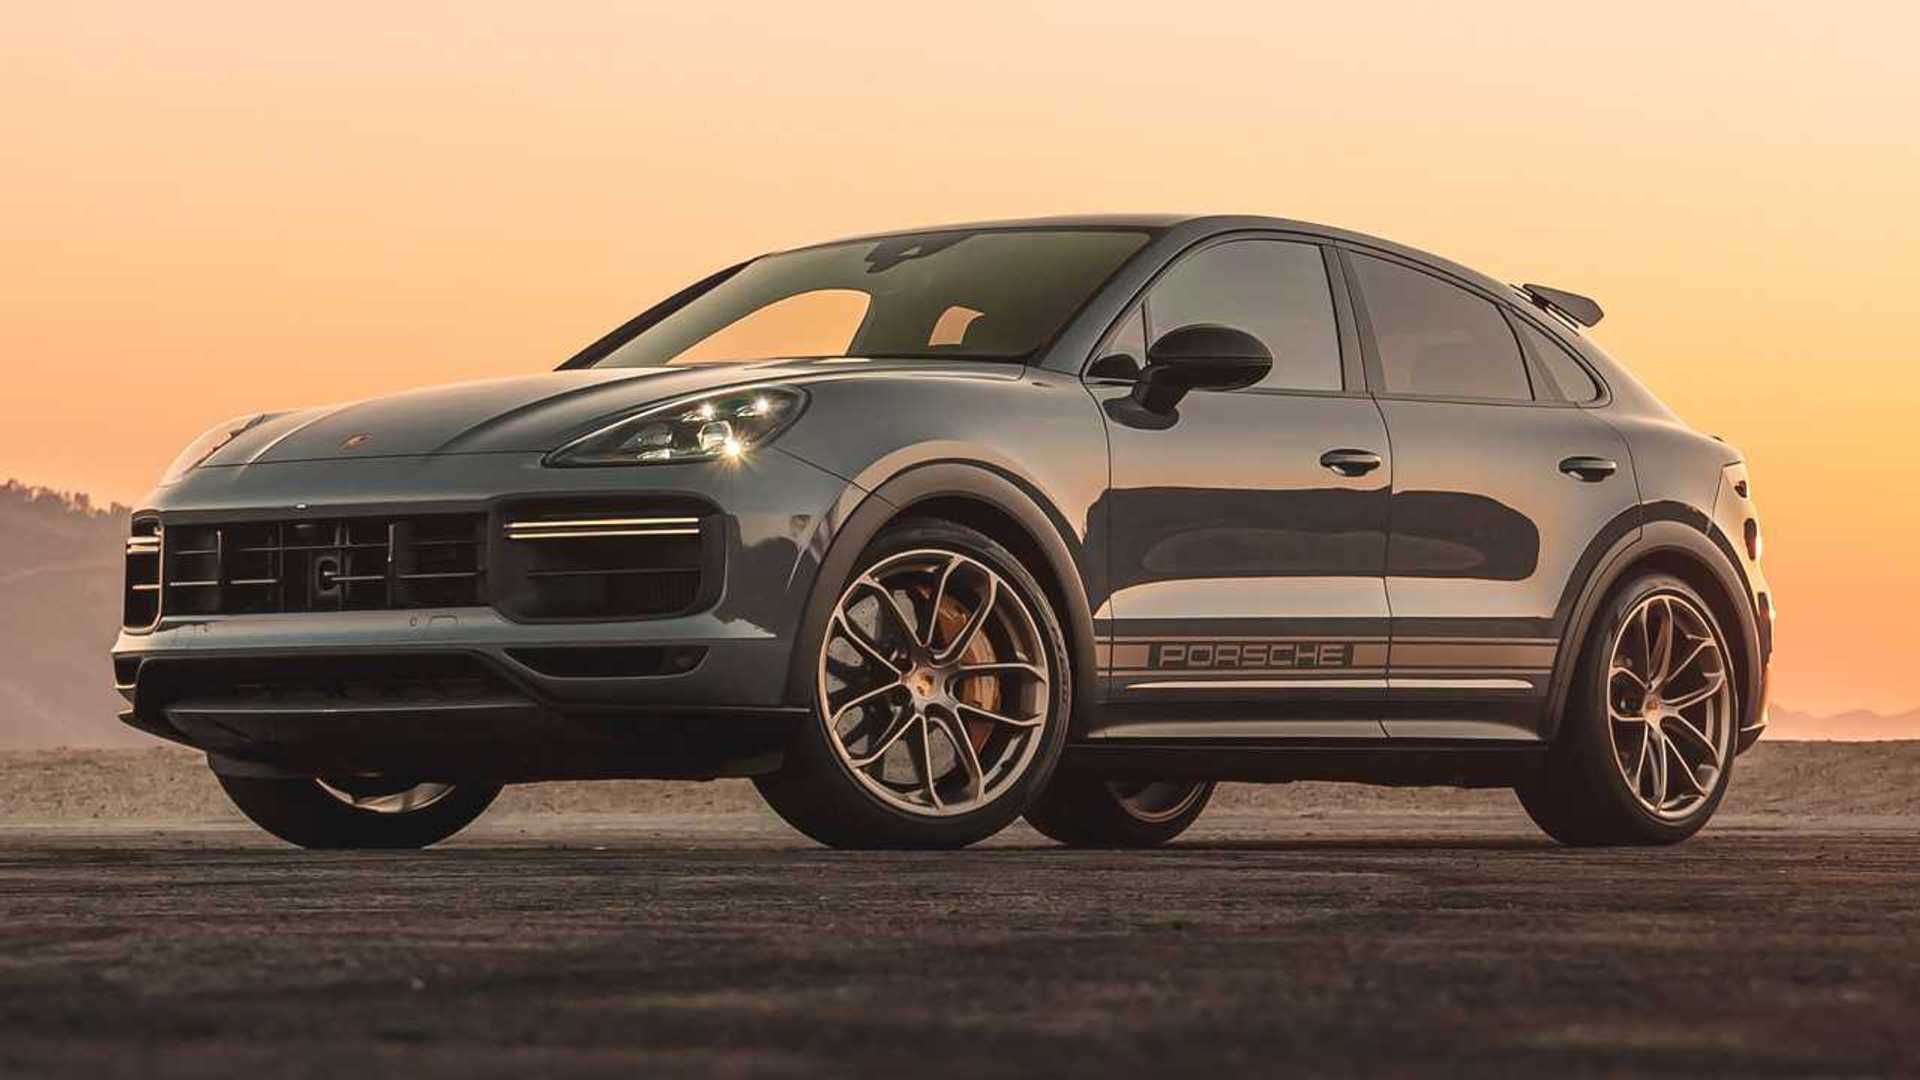 Why It Will Take Porsche Till 2026 To Build An All-Electric Cayenne SUV